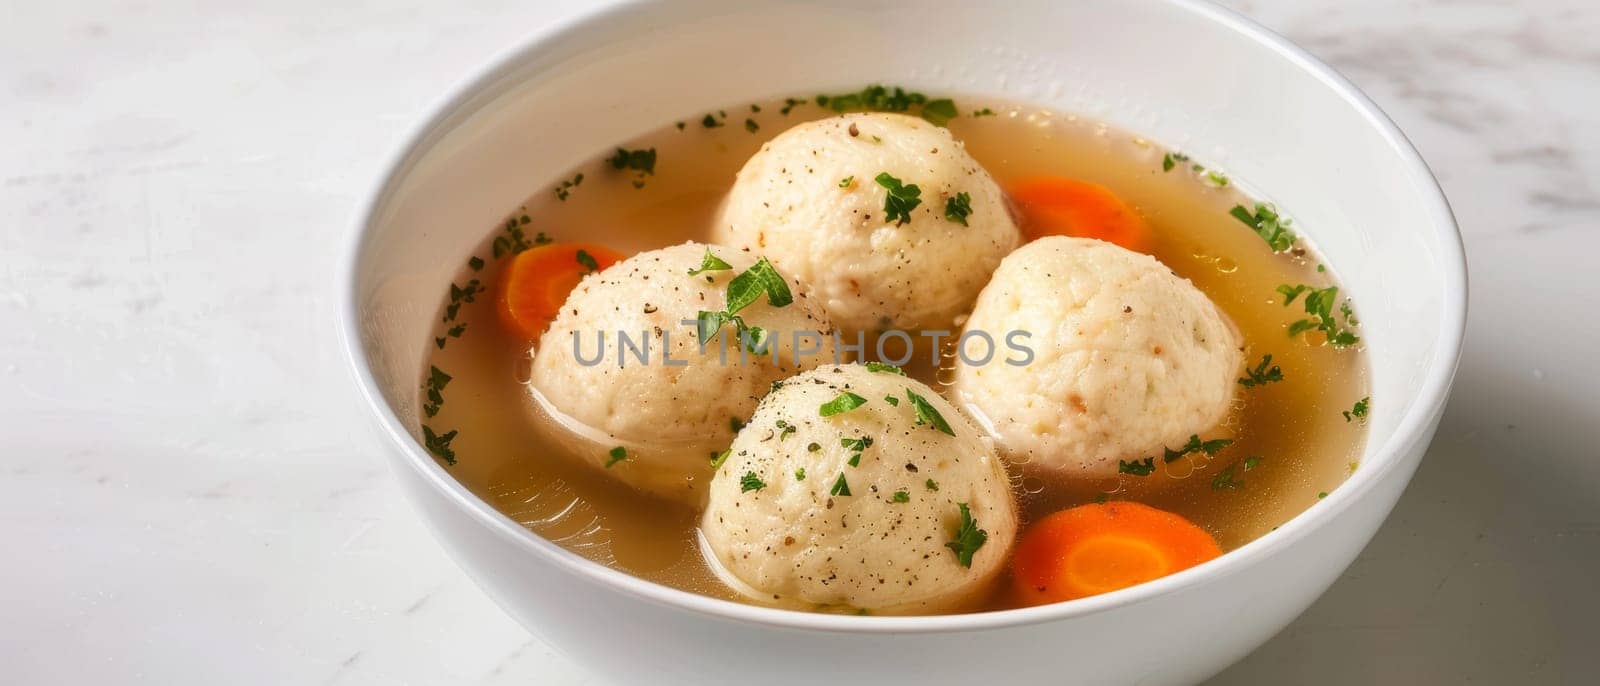 A warm bowl of matzo ball soup with three fluffy matzo balls, carrot slices, and fresh parsley on a marble surface. by sfinks